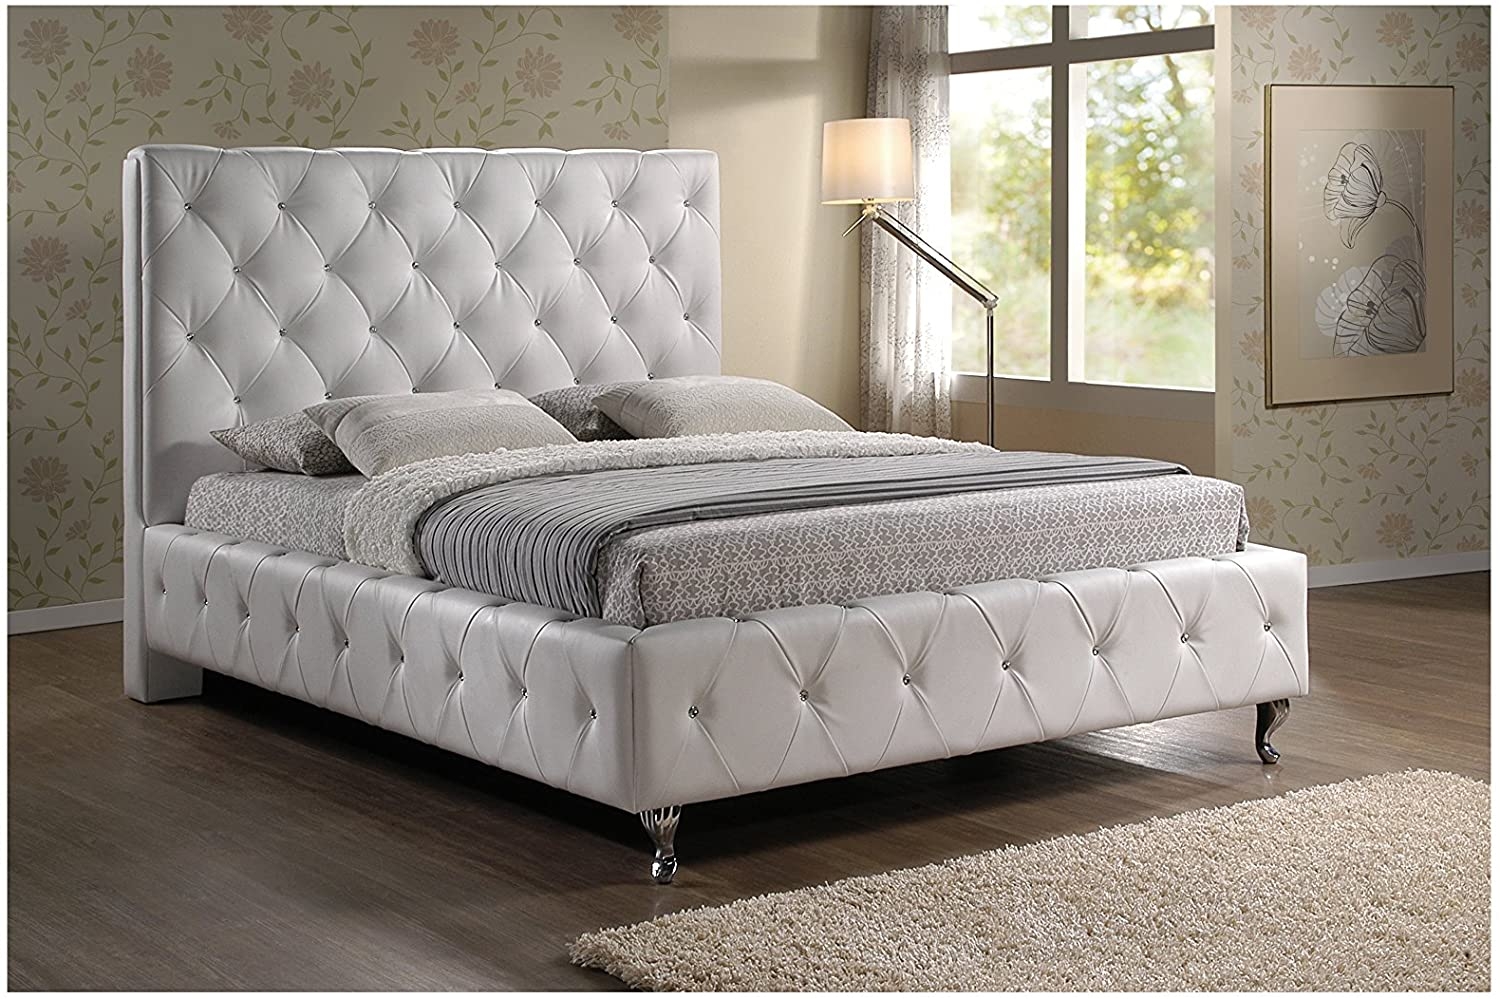 White king size modern headboard tufted design leather look upholstered